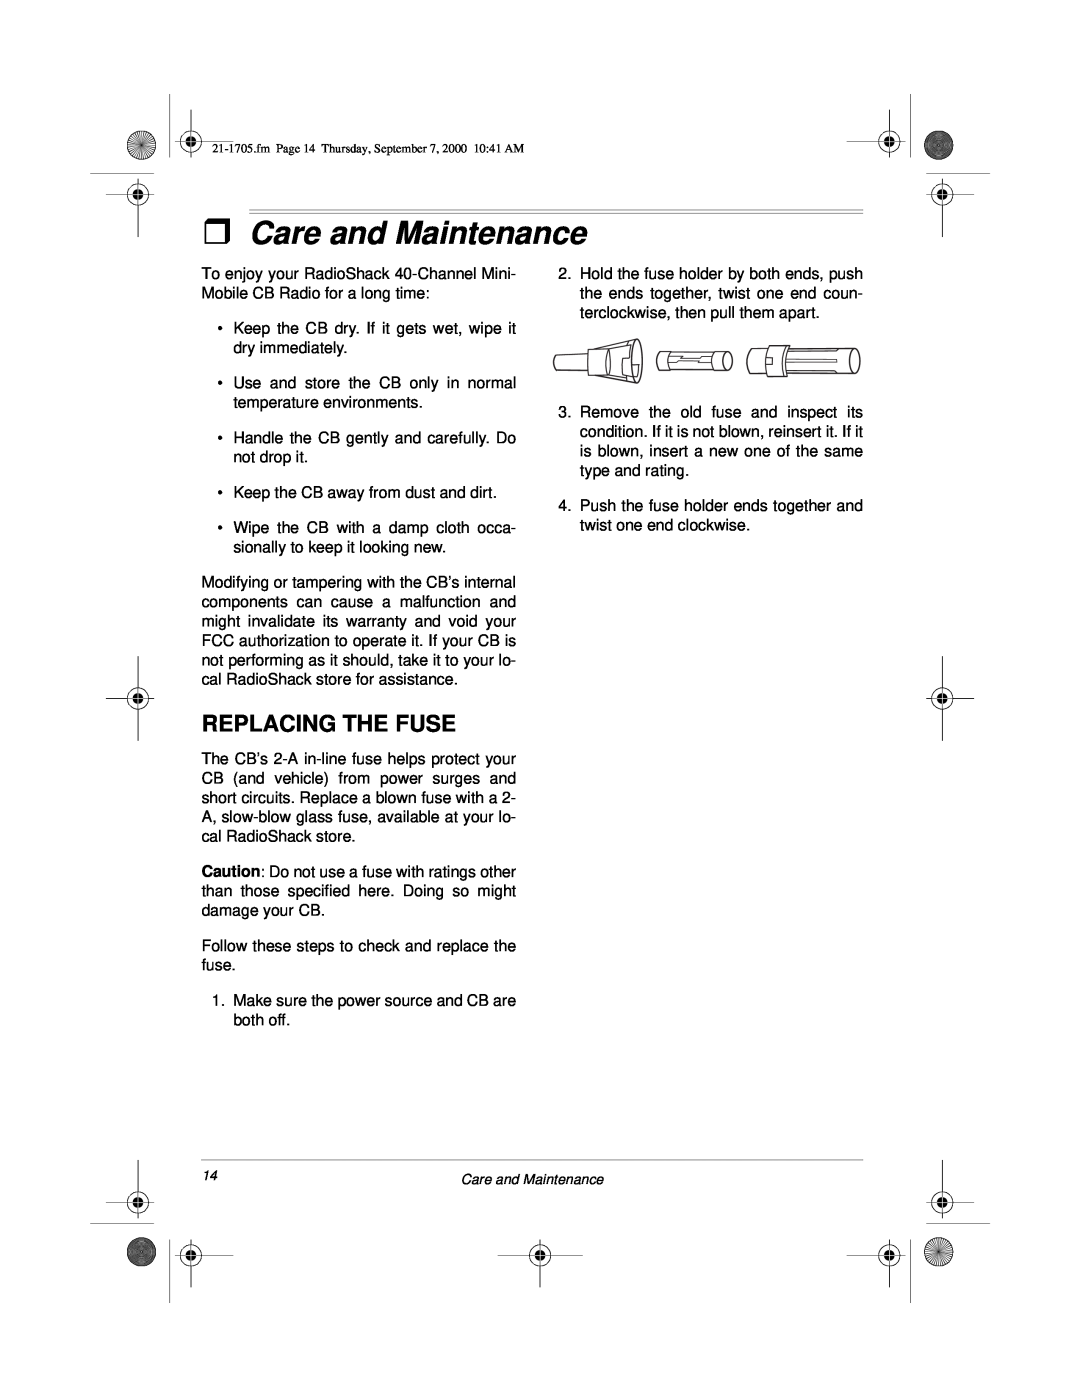 Radio Shack TRC-511 owner manual ˆCare and Maintenance, Replacing The Fuse 